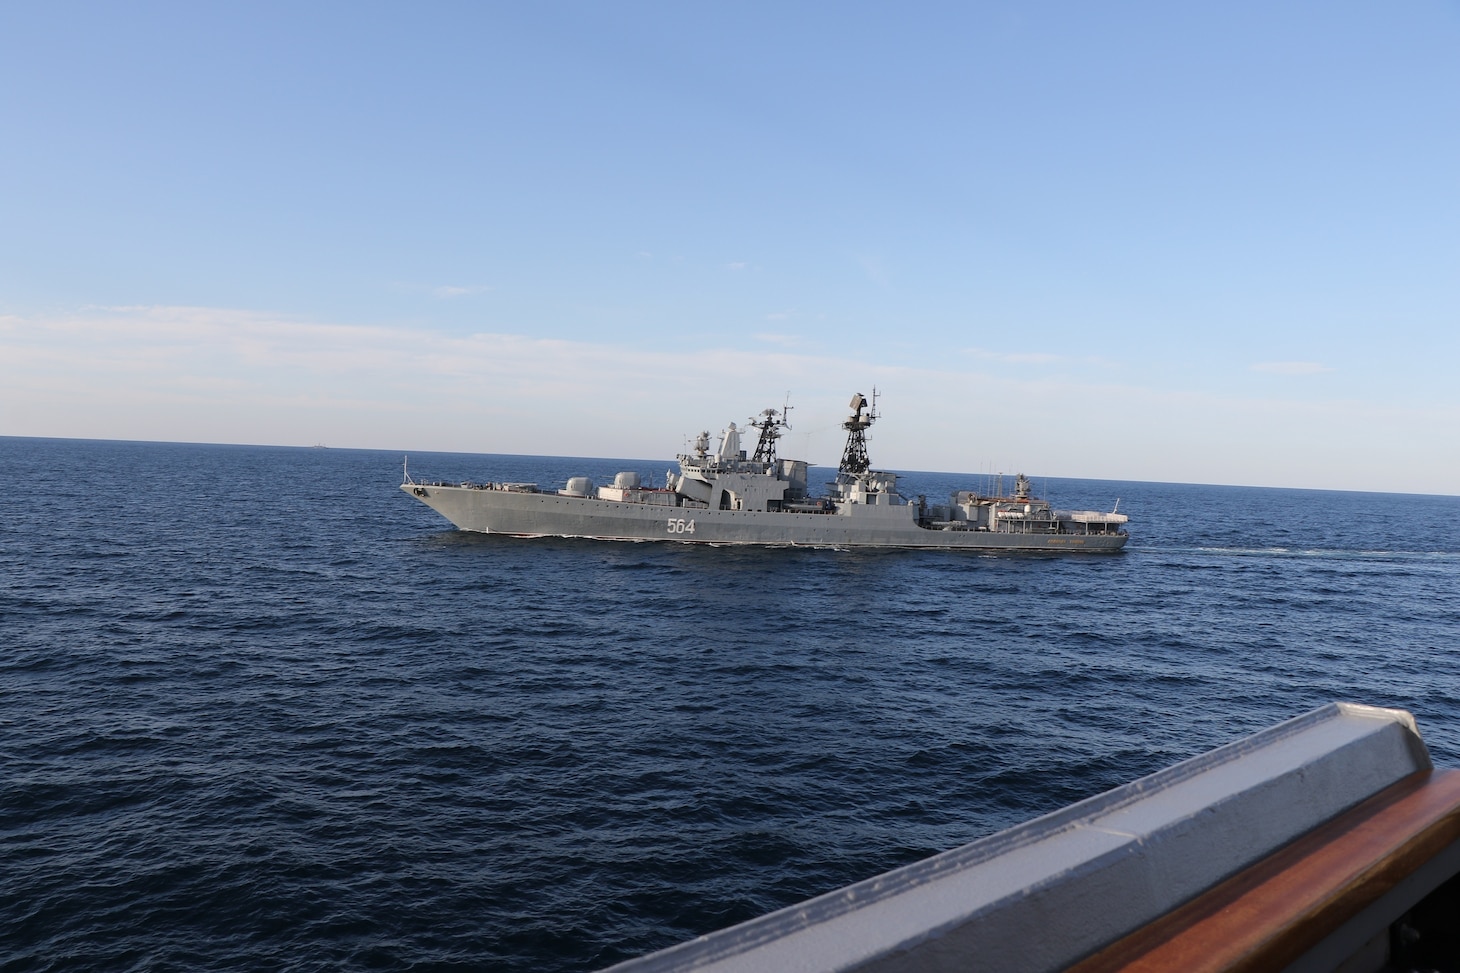 A Russian Udaloy-class destroyer interacts with USS Chafee (DDG 90), while Chafee conducts routine operations in international waters in the Sea of Japan.